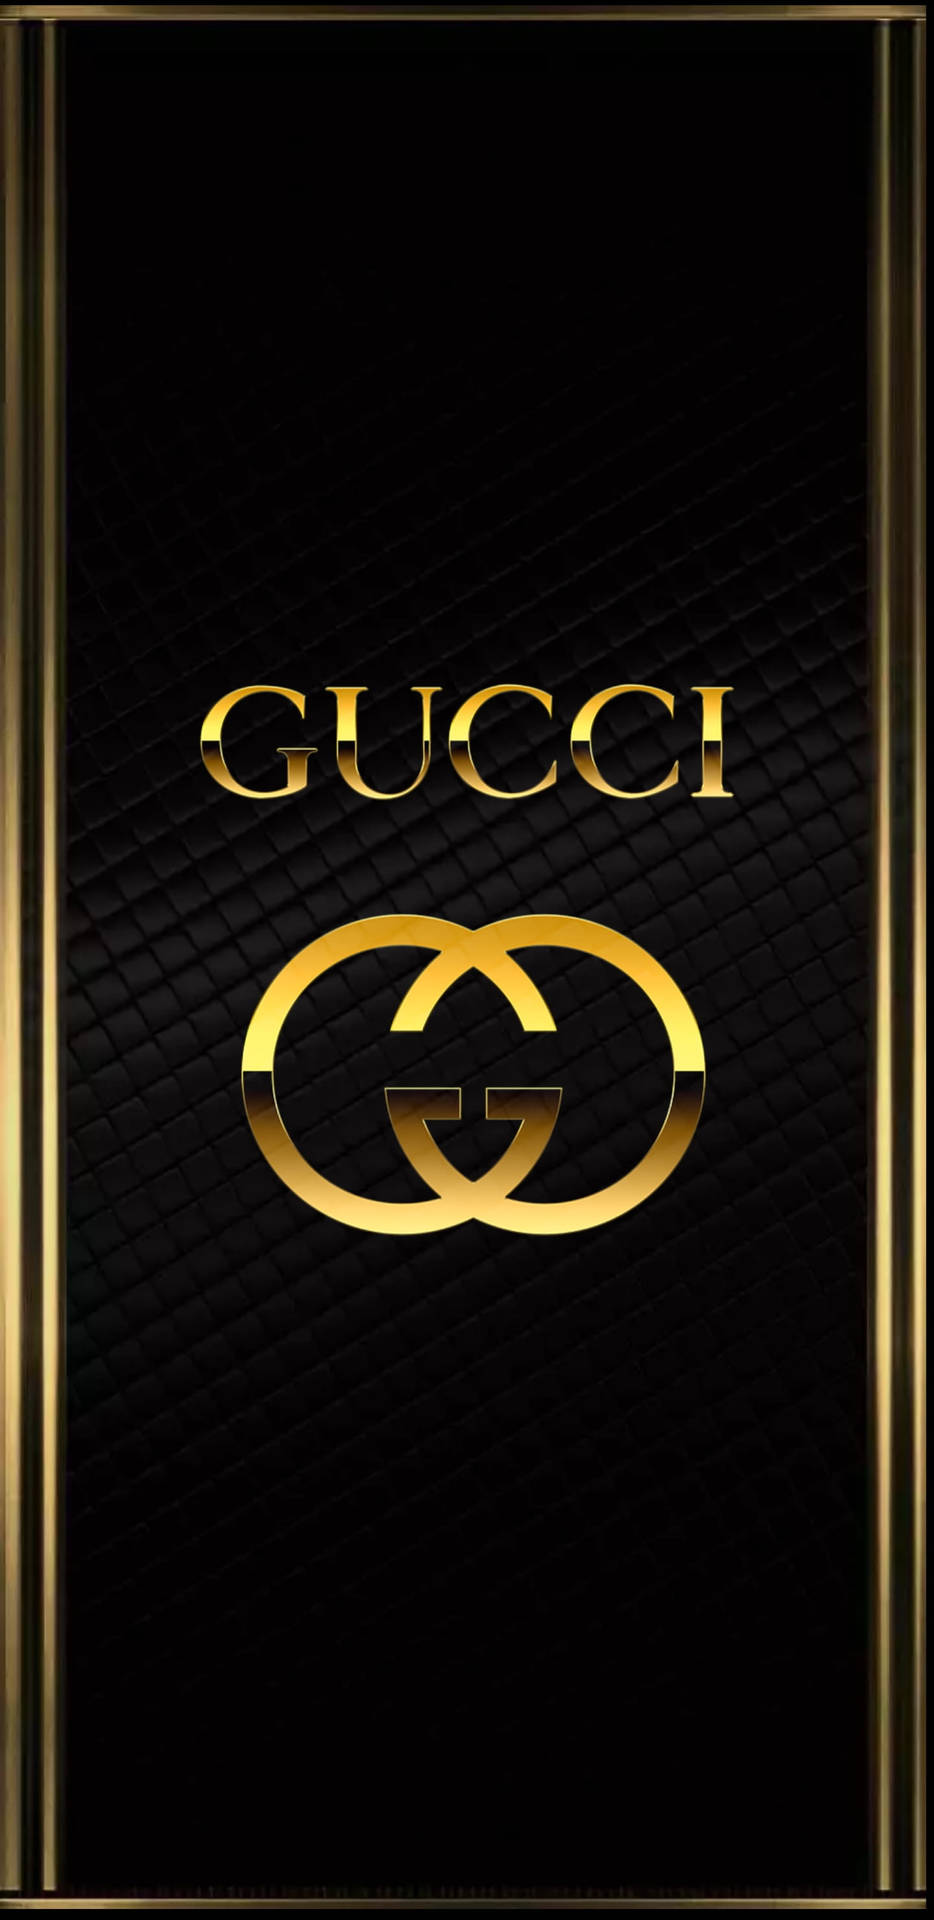 Gold Gucci Iphone Background